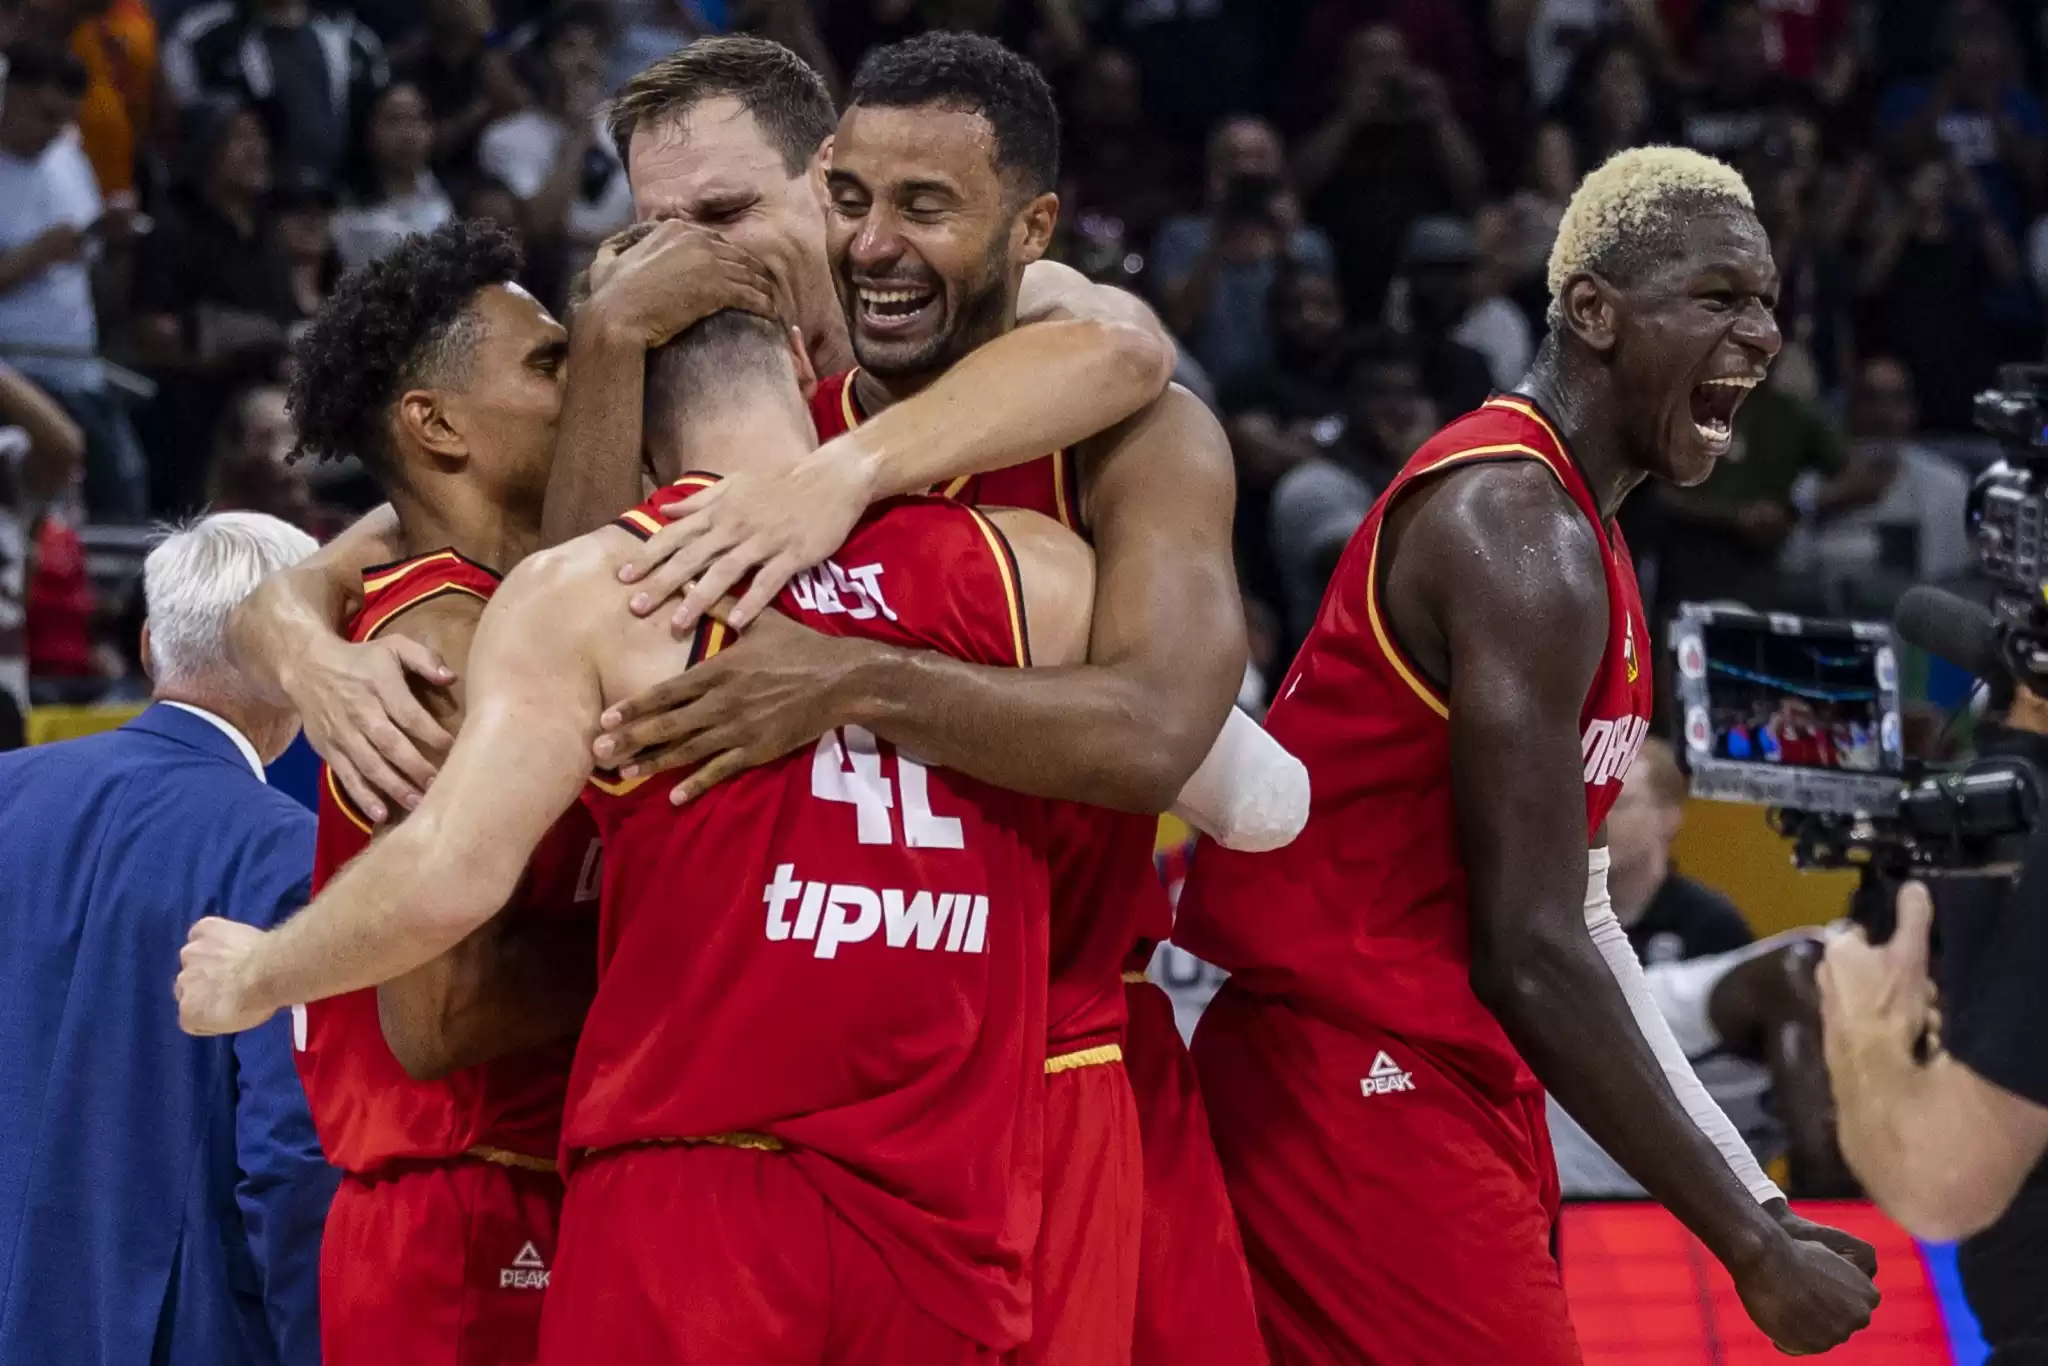 Germany upsets US with a 224-point thriller, secures spot in FIBA World Cup final